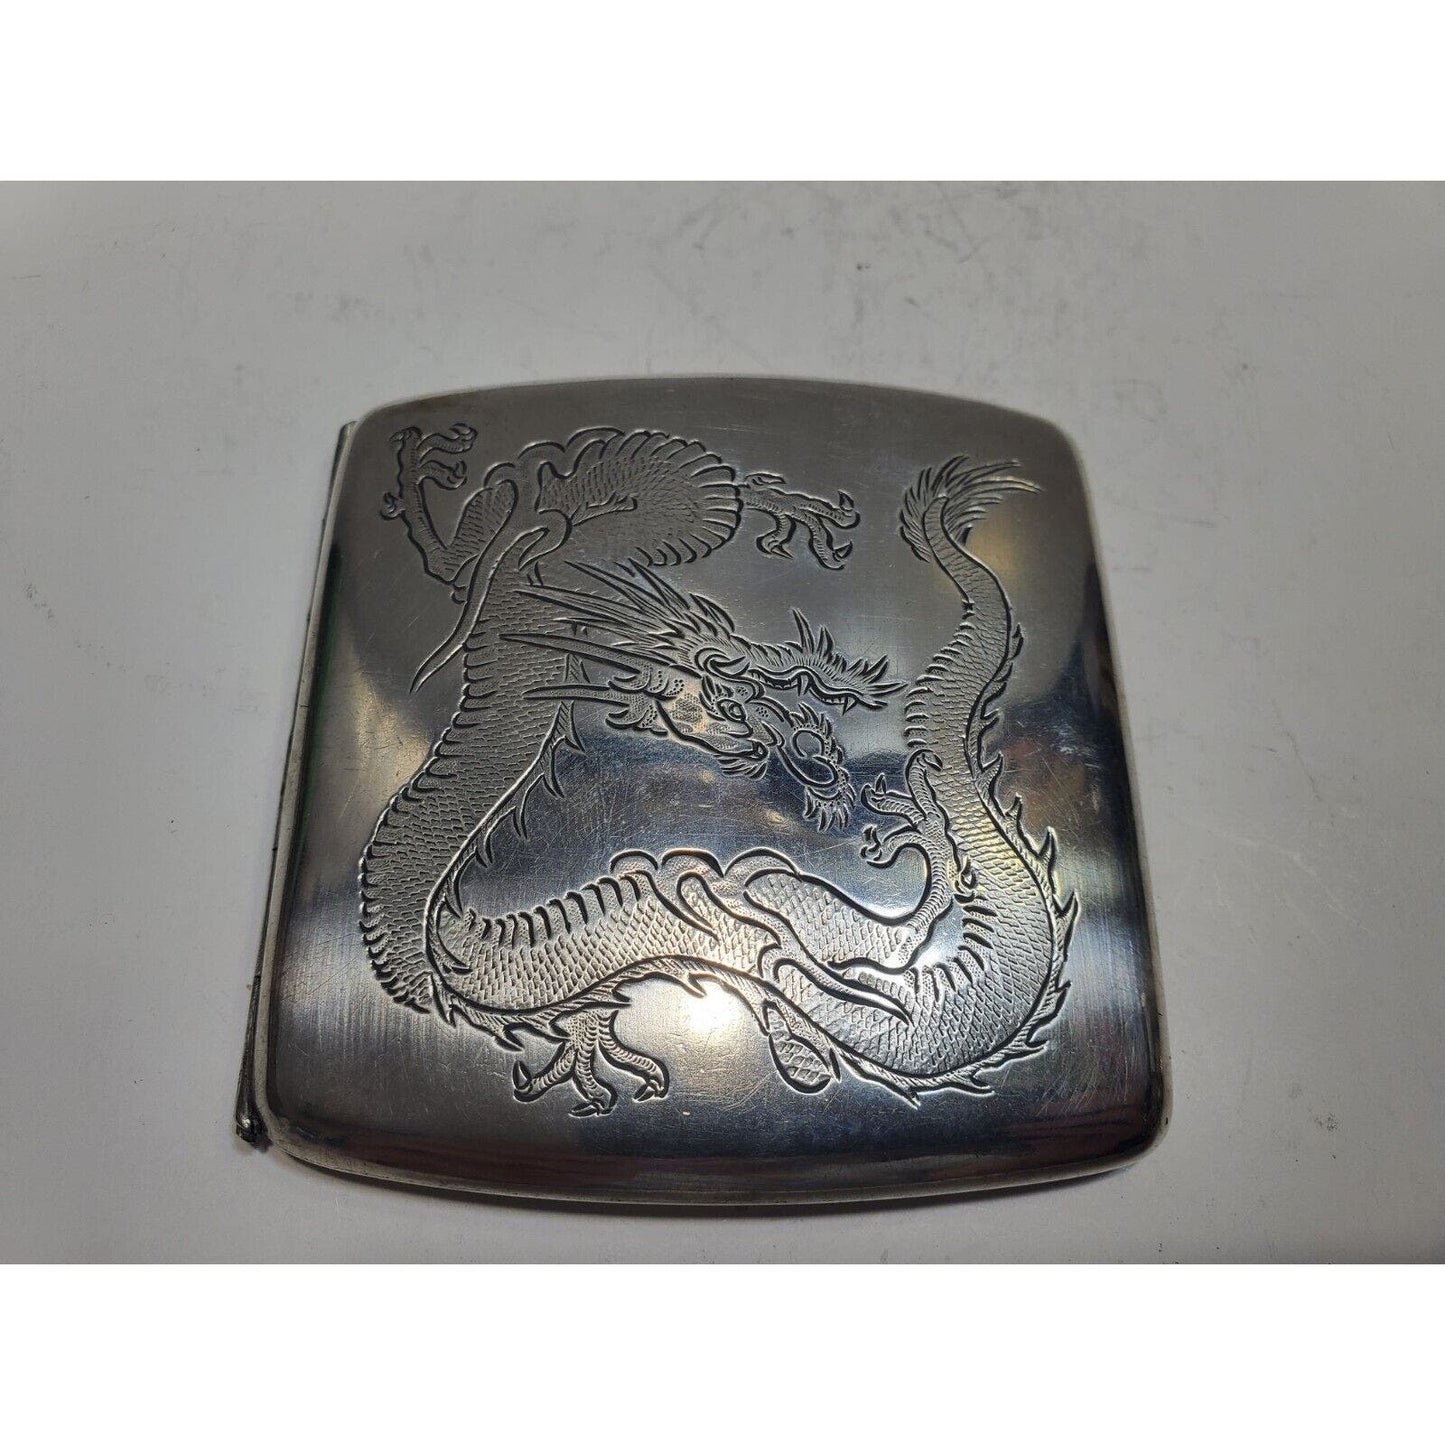 Antique Sterling Silver Chinese Dragon Cigarette Case 3 1/4 x 3 1/4" 6602/3